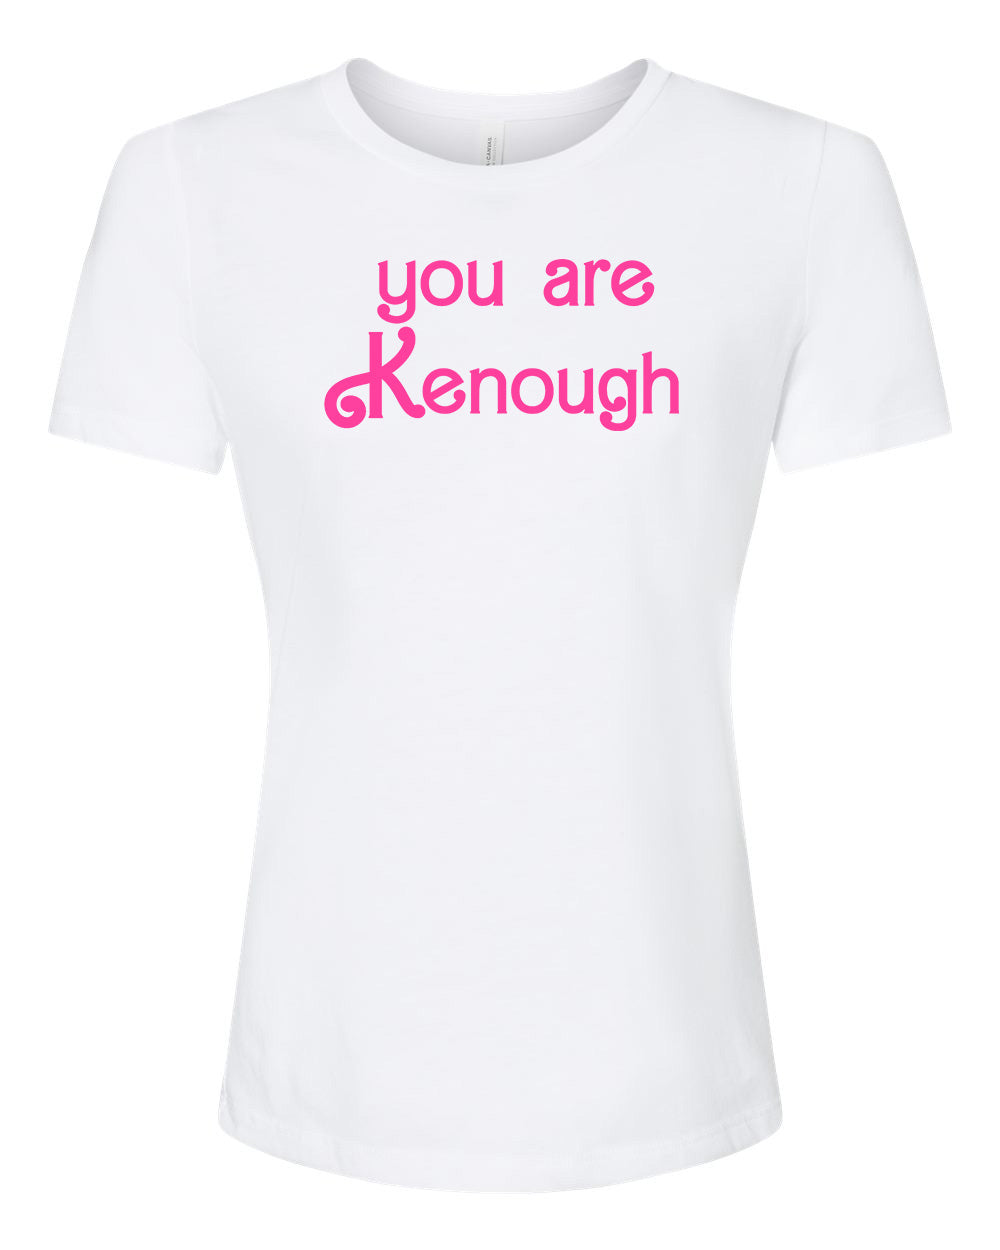 You Are Kenough - Women's Crew Tee - White with Pink Ink